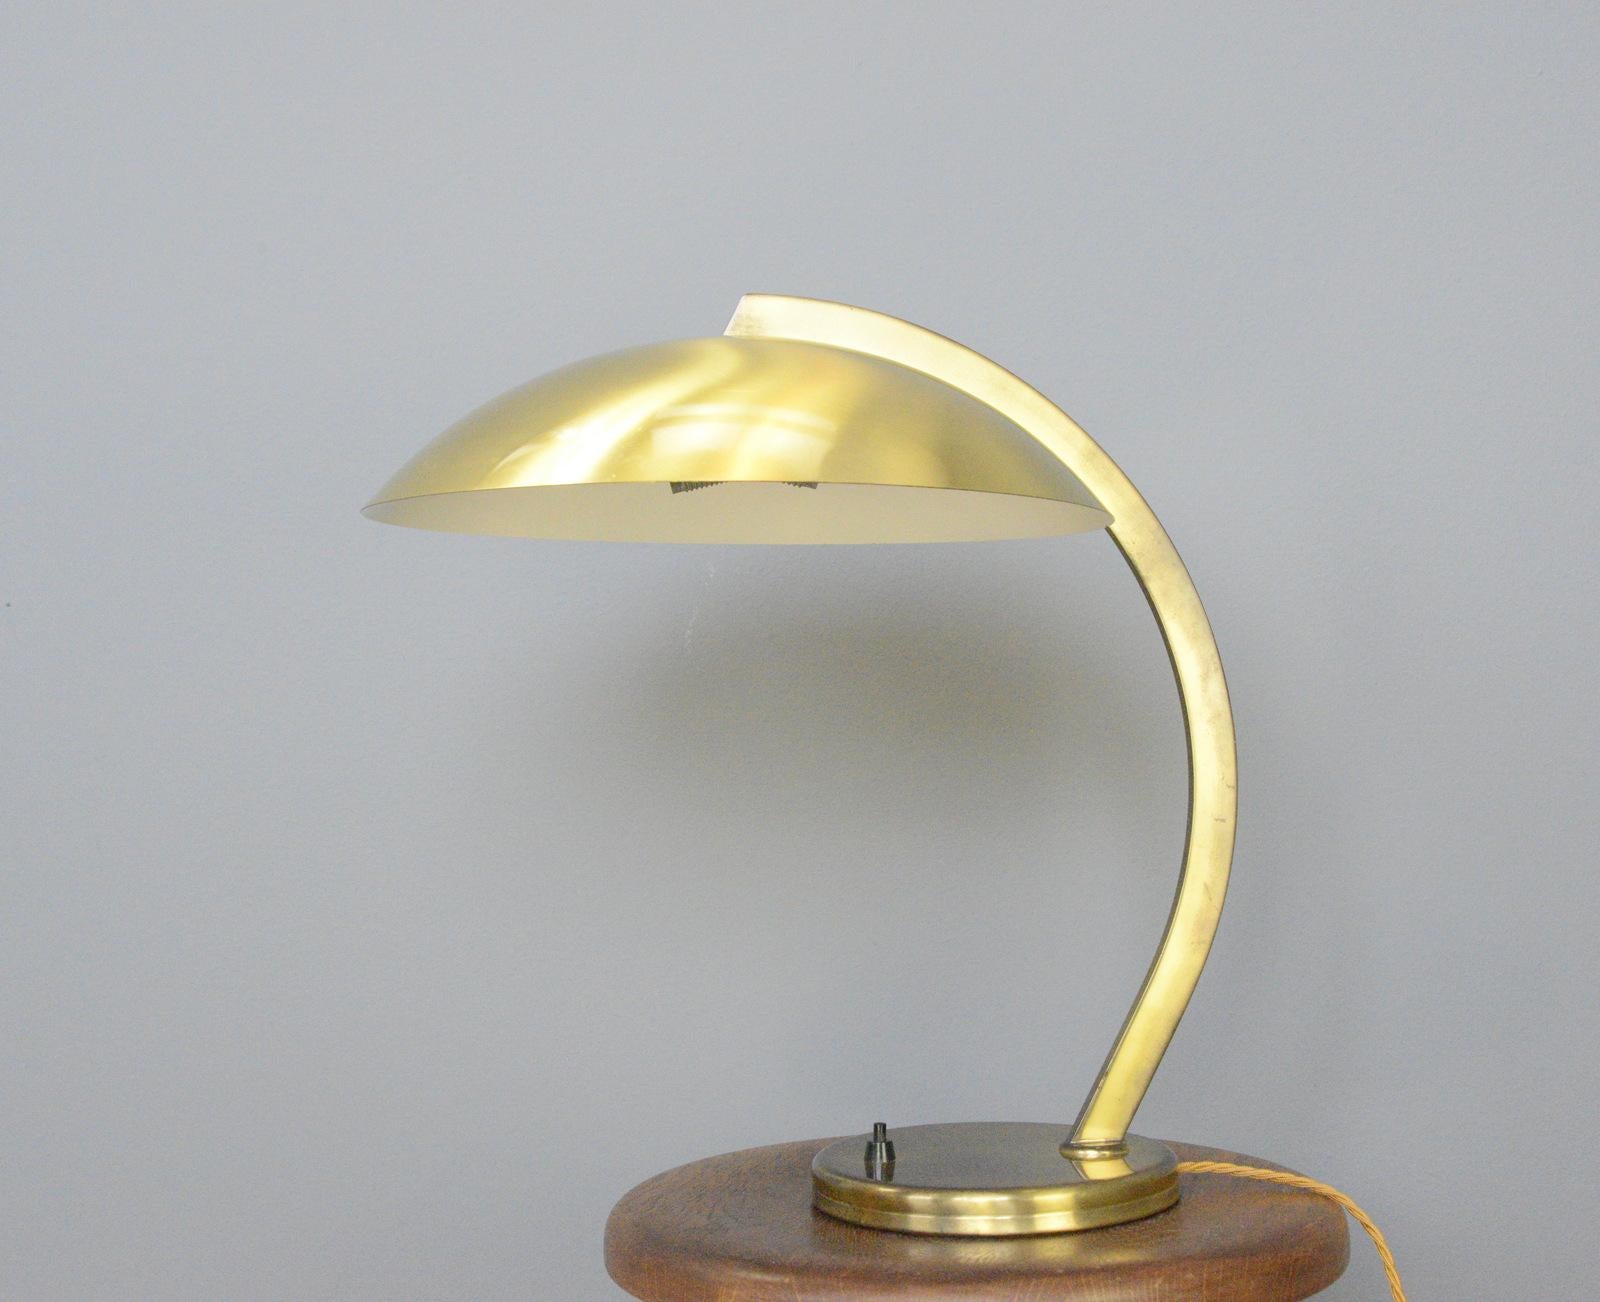 Bauhaus brass table lamp by Hillebrand Circa 1950s

- Fully brass
- Dual bulb holders
- Takes E27 fitting bulbs
- On/Off switch on the base
- Made by Hillebrand 
- German ~ 1950s
- 44cm tall x 36cm wide x 42cm